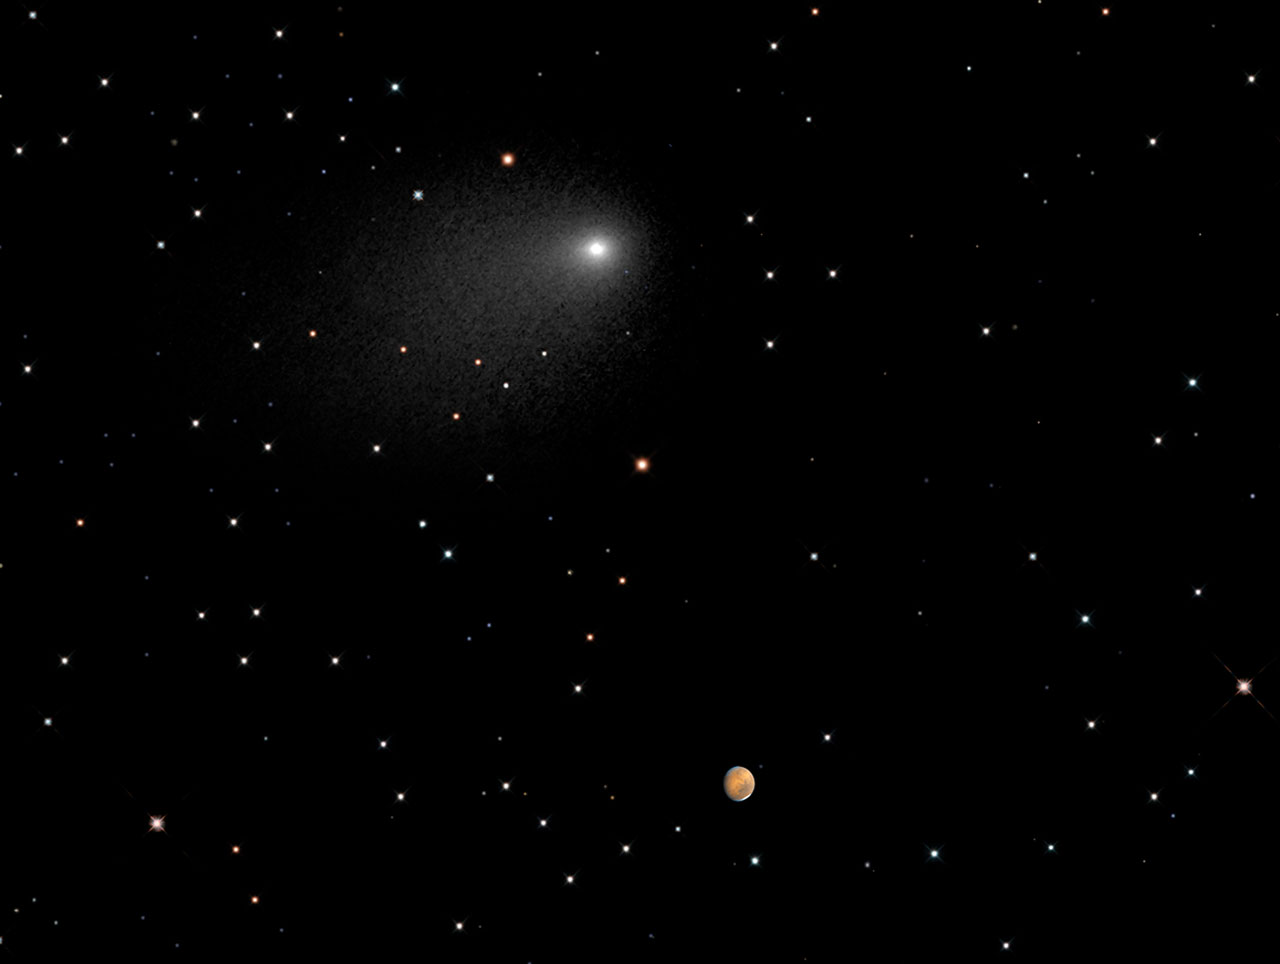 Comet and Mars in the same image. 